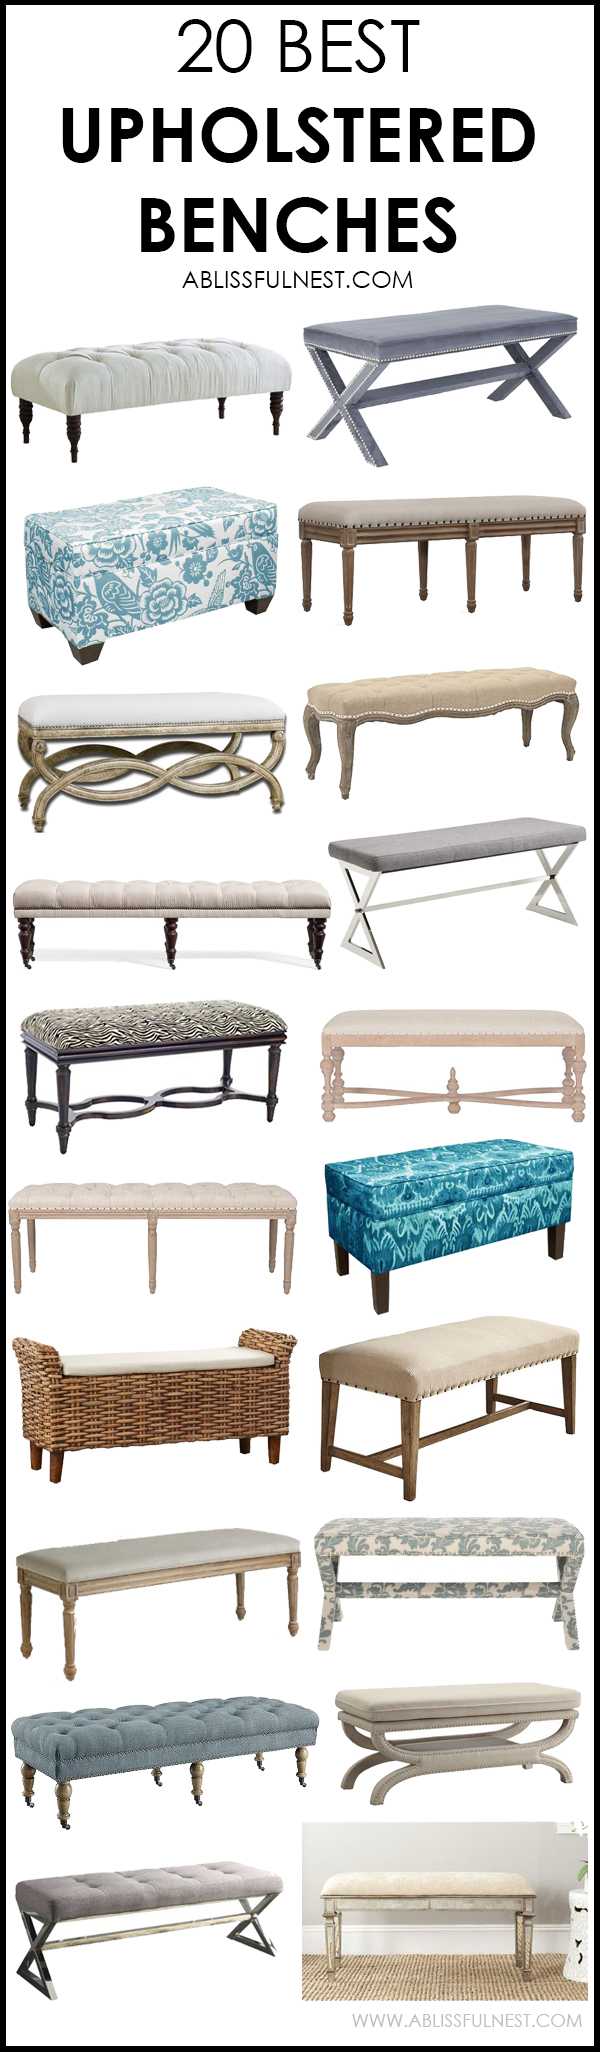 This list is AMAZING. 20 fabulous upholstered benches to choose from by A Blissful Nest. #upholsteredbench #benches #bedroomideas #masterbedroom #designtips #homedecorideas https://ablissfulnest.com/